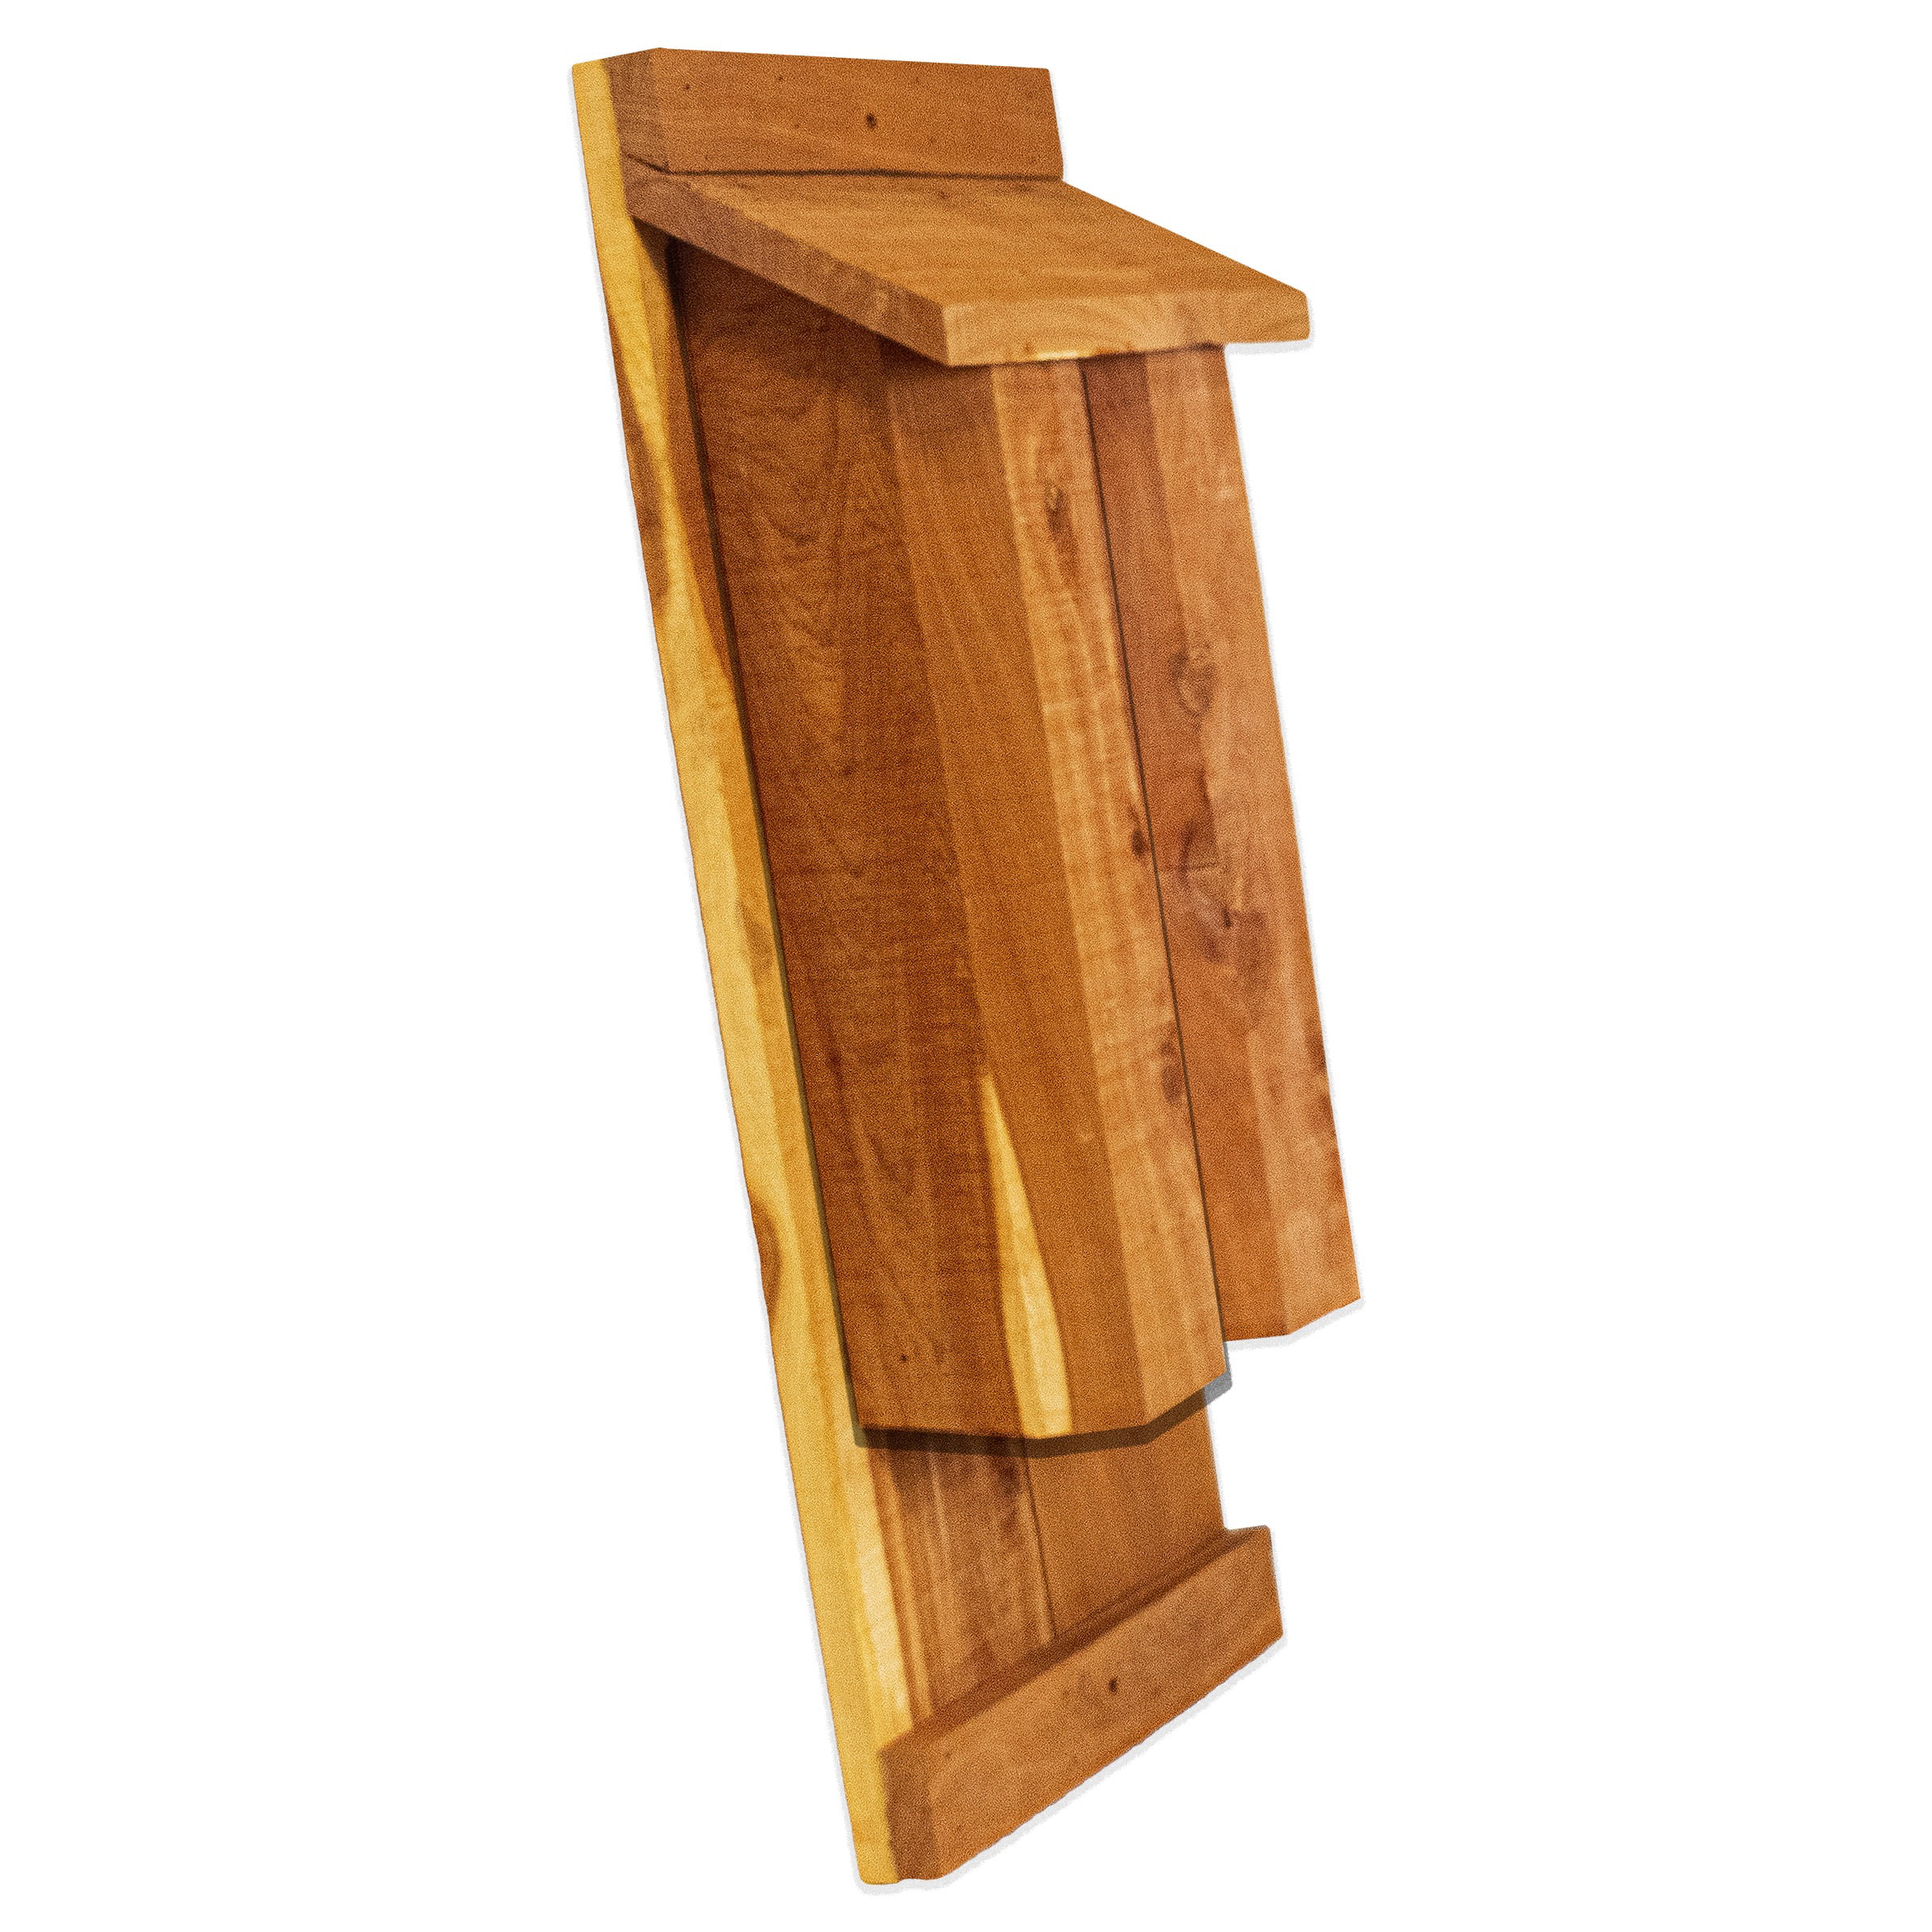 Kenley Bat House Outdoor Box Shelter with Single Chamber Cedar Wood 